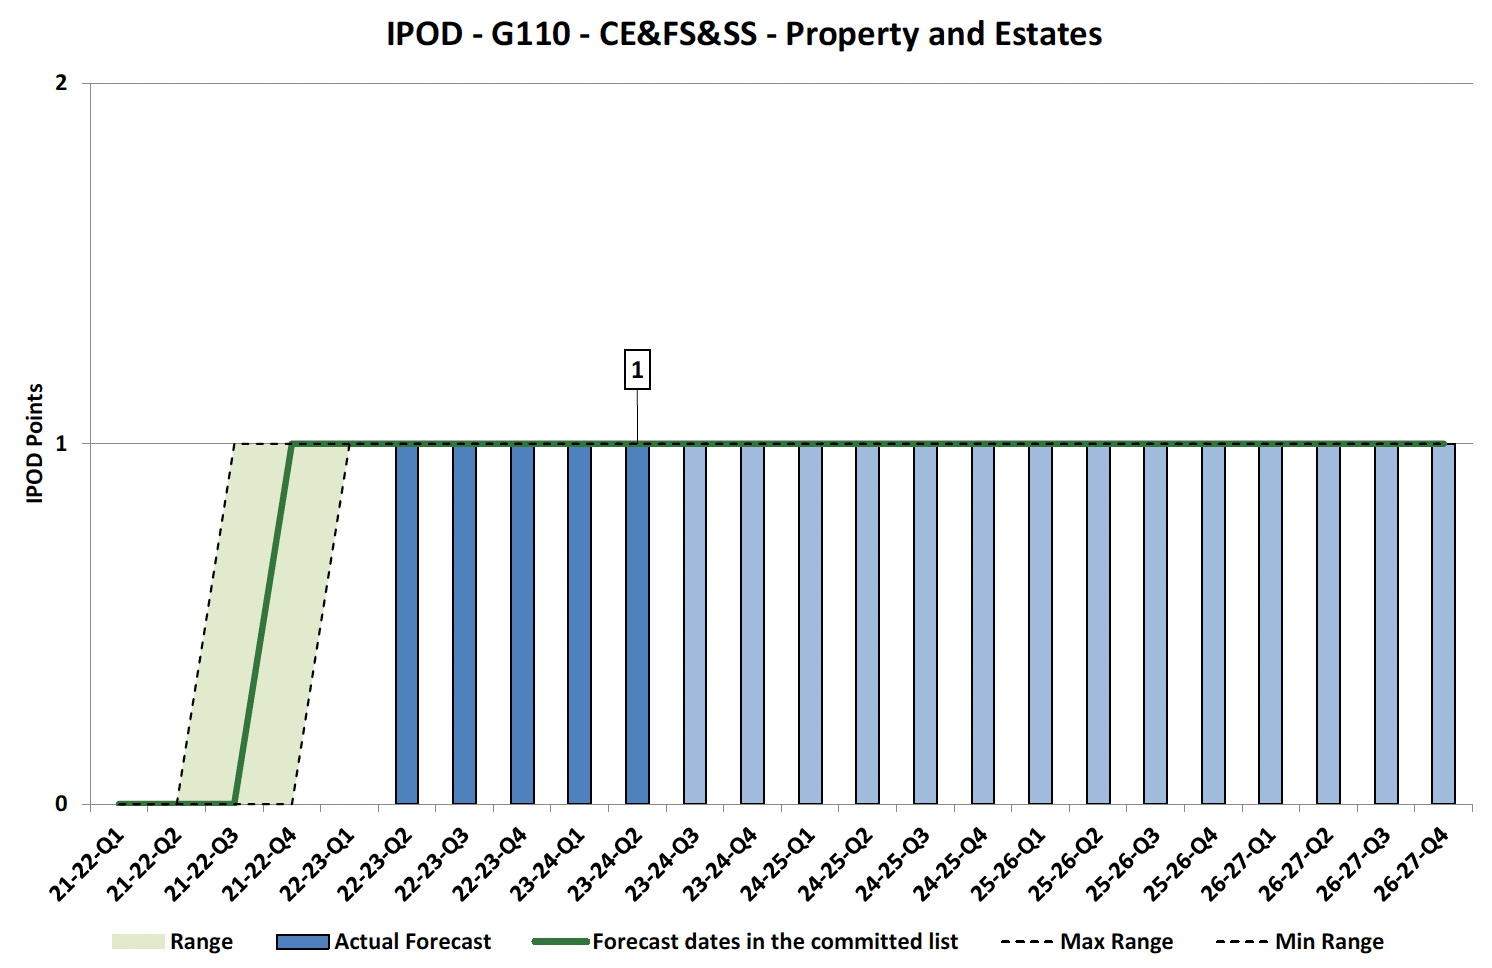 Chart showing IPOD points achieved or forecast for Financial Completion milestone against target range for Property and Estates Projects in CE&FS&SS Portfolio